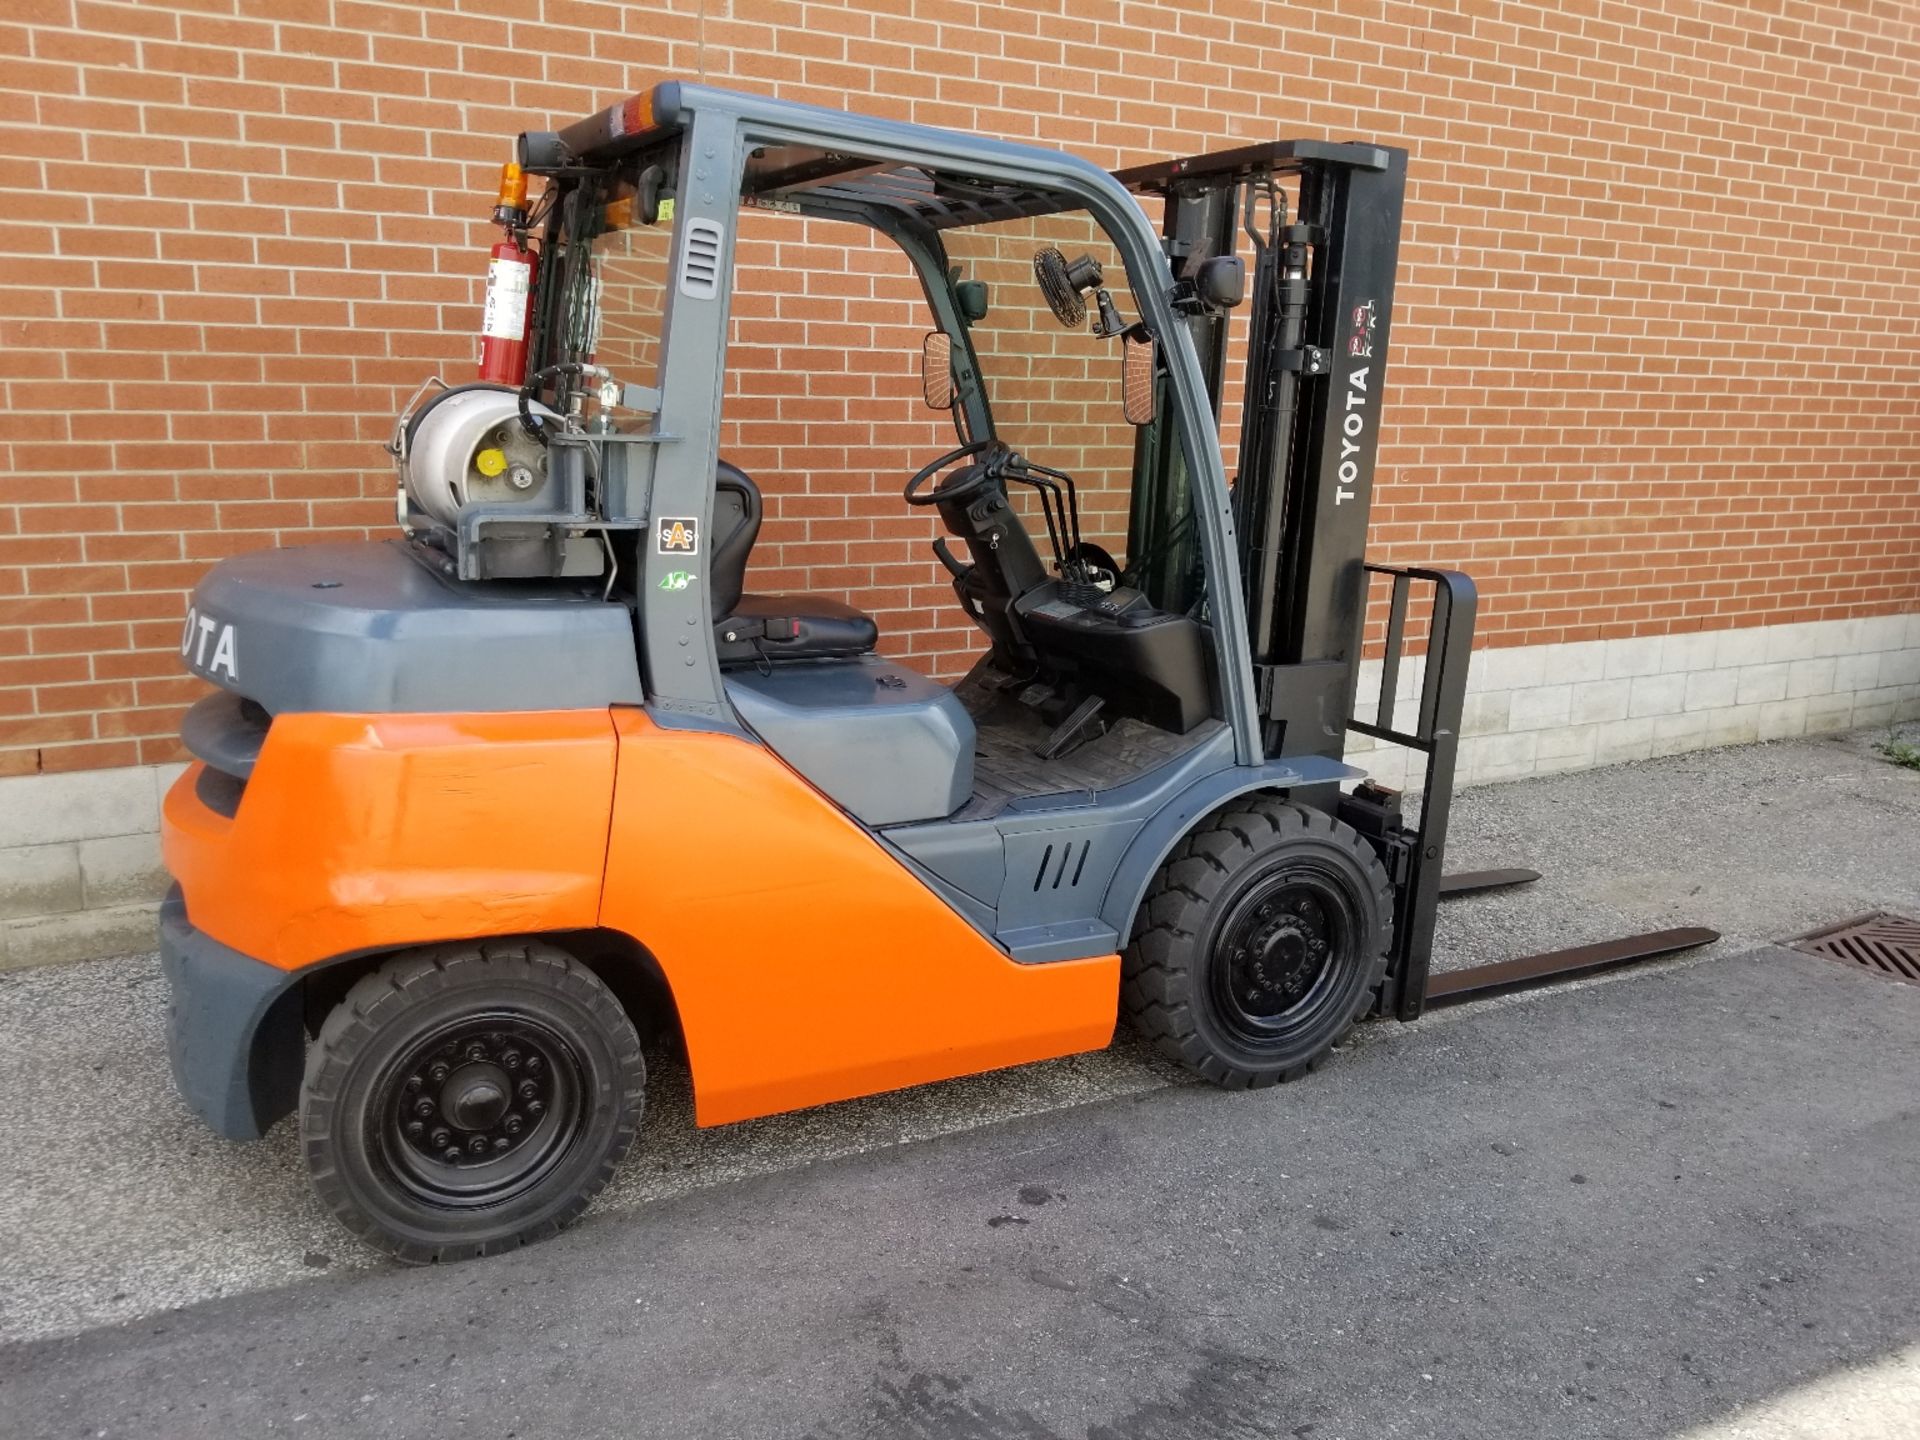 TOYOTA (2014) 8FG35U LPG FORKLIFT WITH 8000 LB. CAPACITY, 132" MAX. VERTICAL LIFT, SIDE SHIFT, - Image 2 of 3